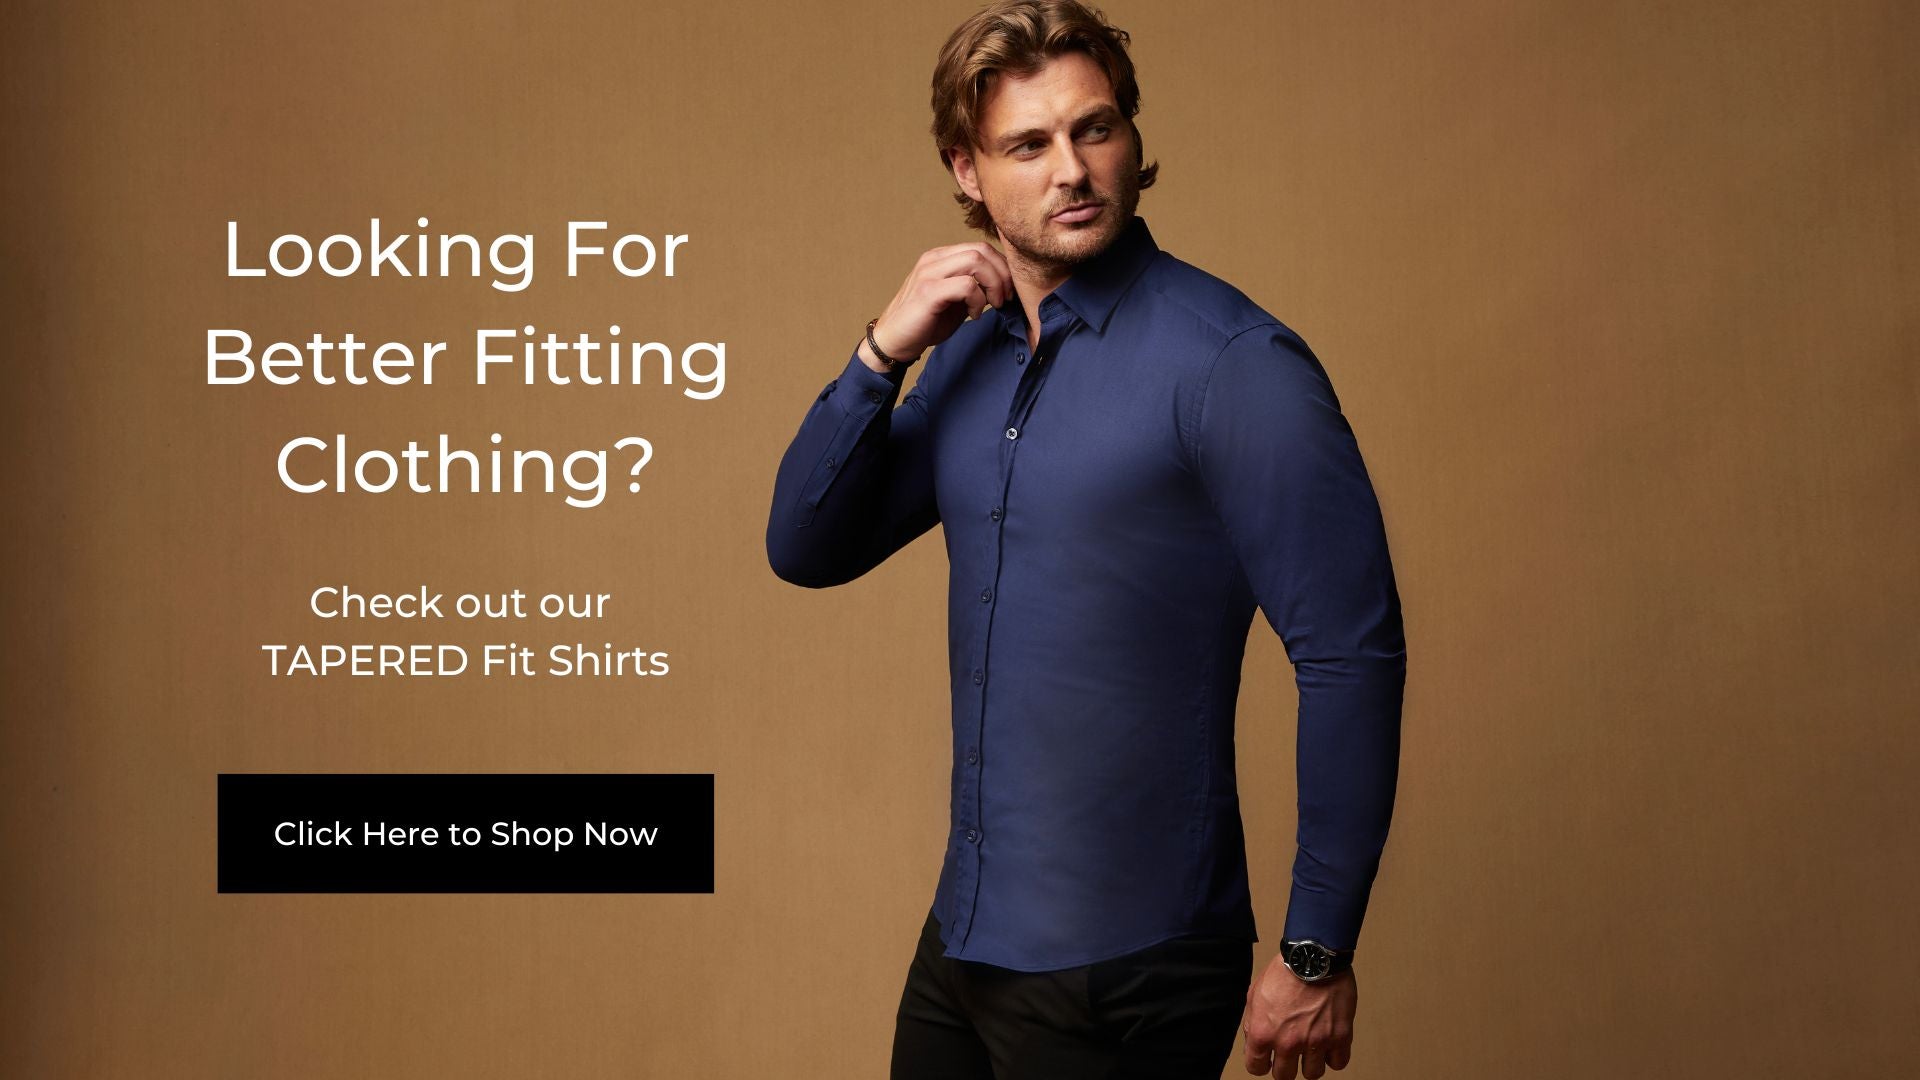 The Fit for You: Slim, Loose or Standard?